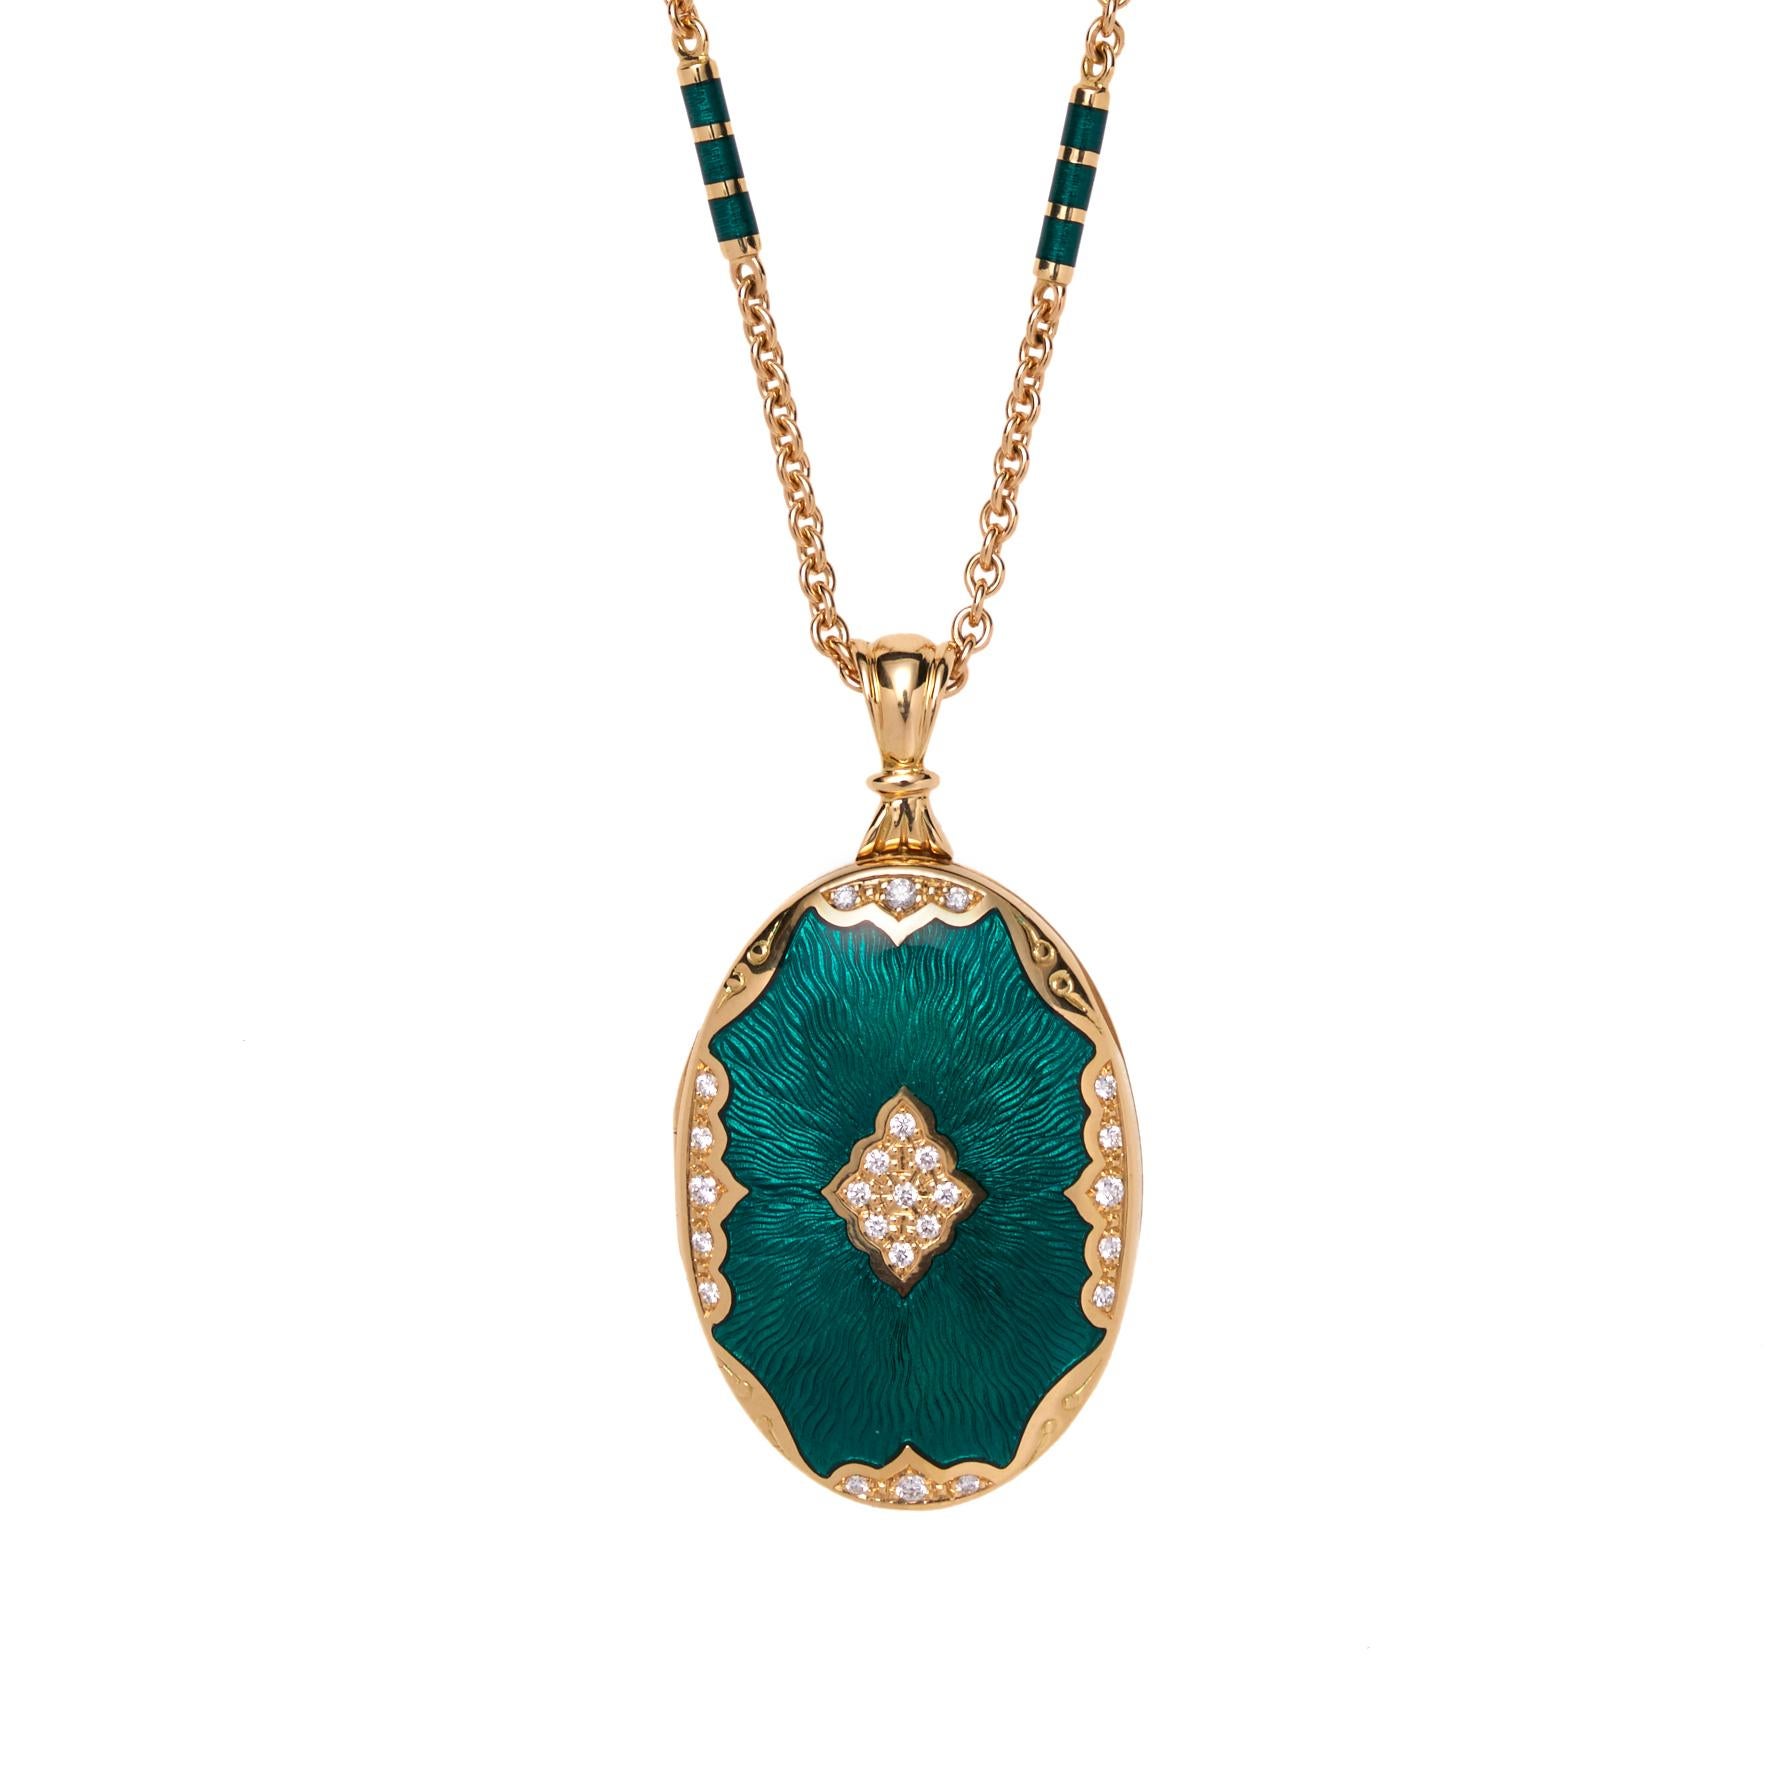 Art Nouveau 18 Karat Yellow Gold Locket with Green Ename and Diamonds on Chain with Enamel For Sale